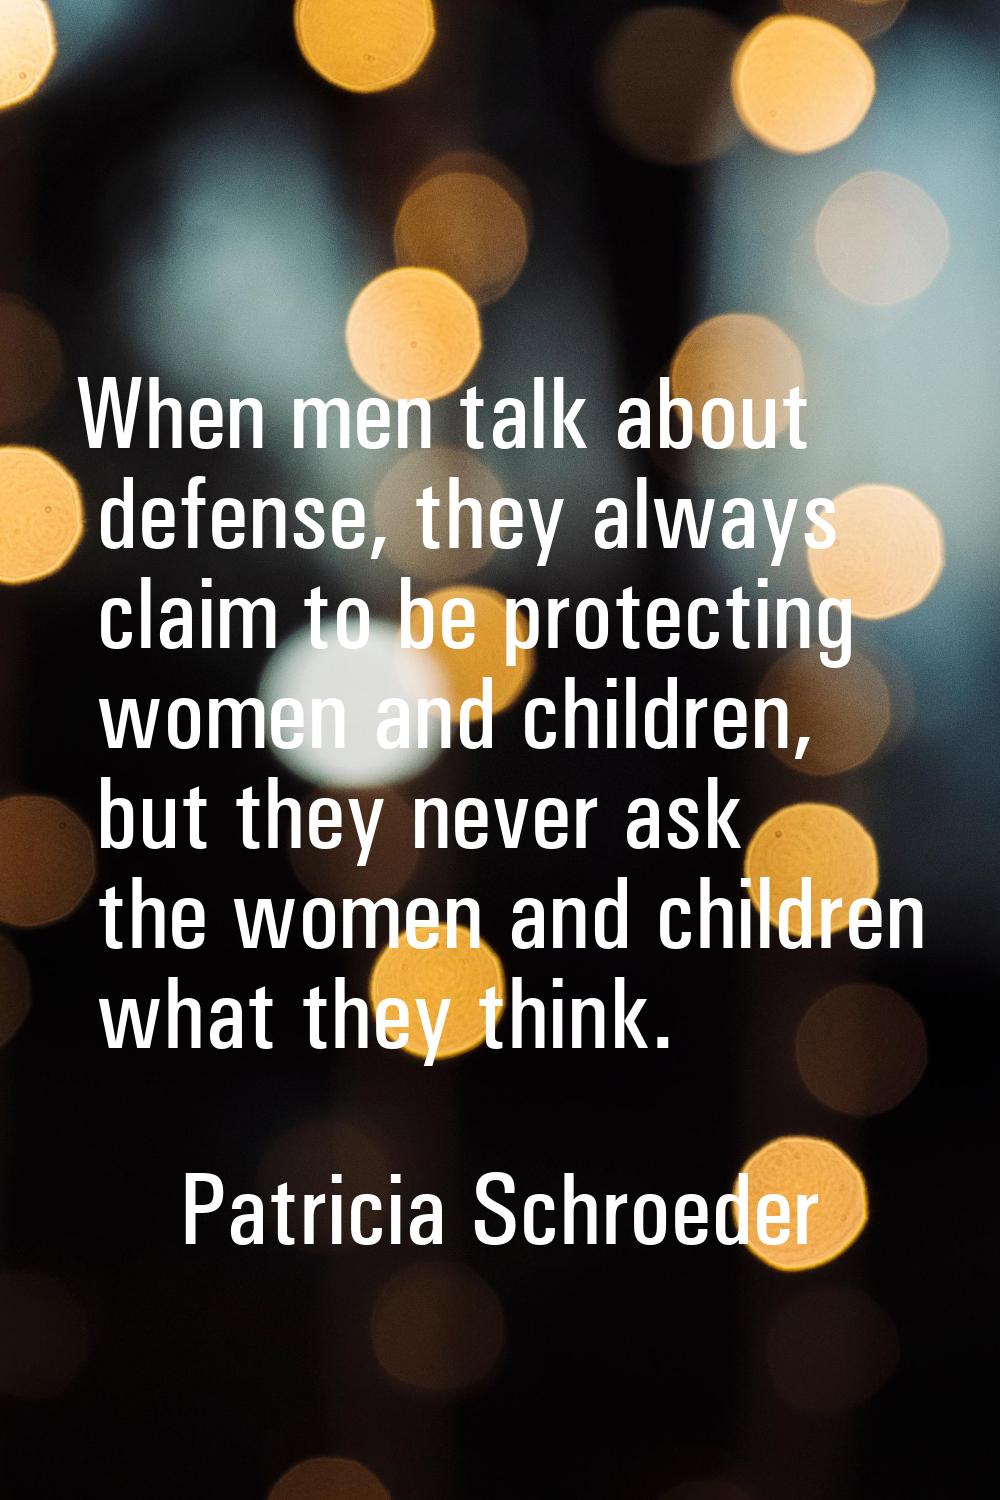 When men talk about defense, they always claim to be protecting women and children, but they never 